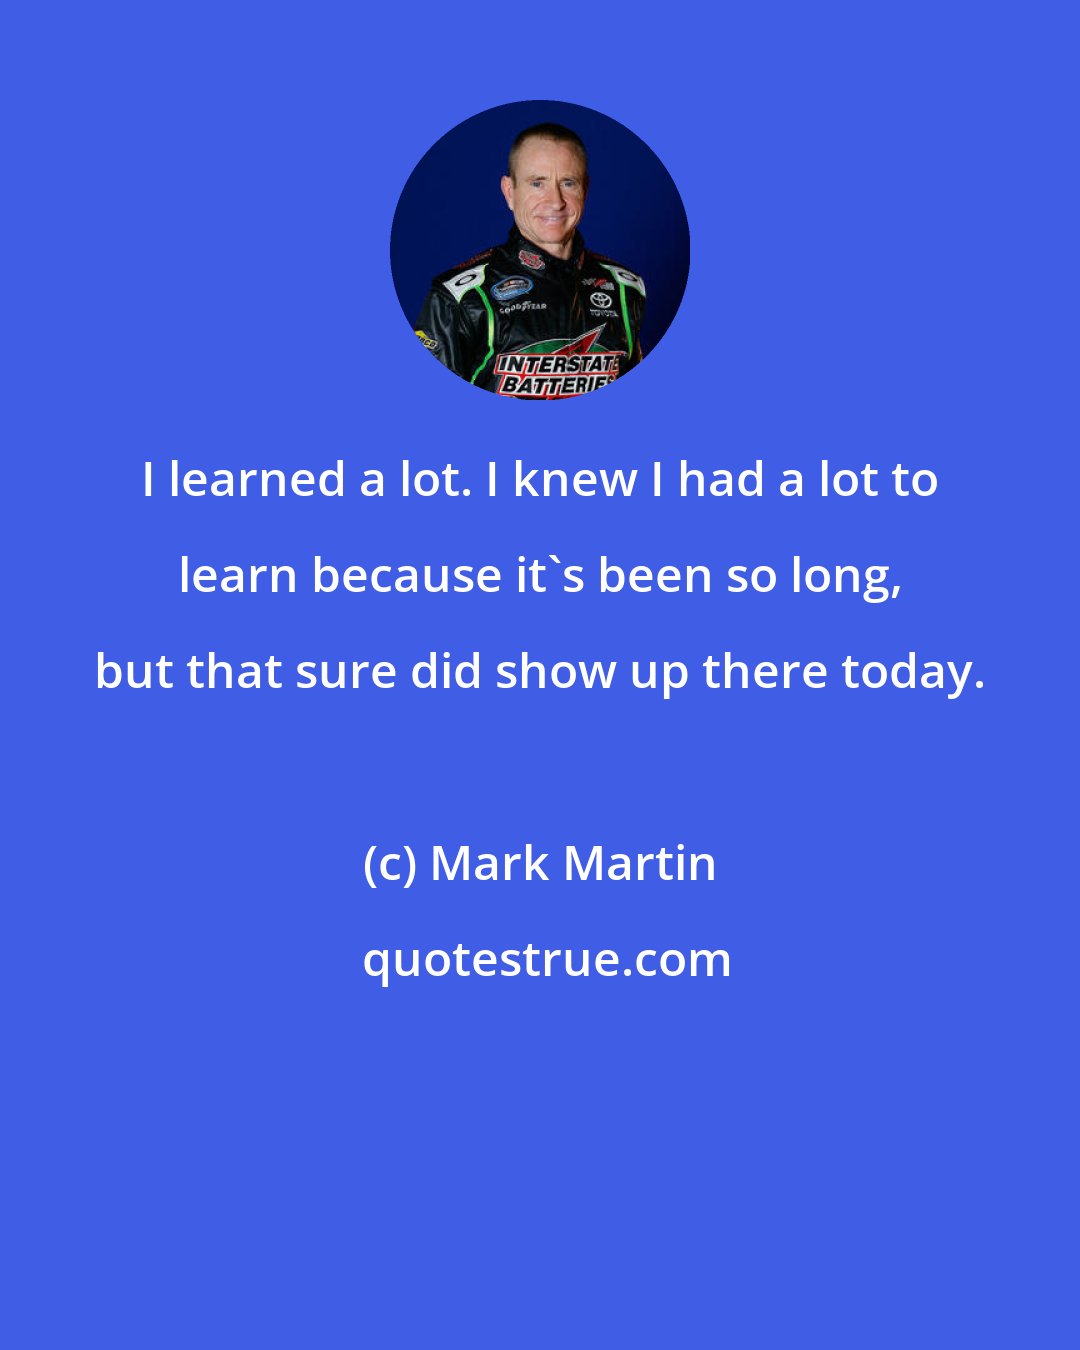 Mark Martin: I learned a lot. I knew I had a lot to learn because it's been so long, but that sure did show up there today.